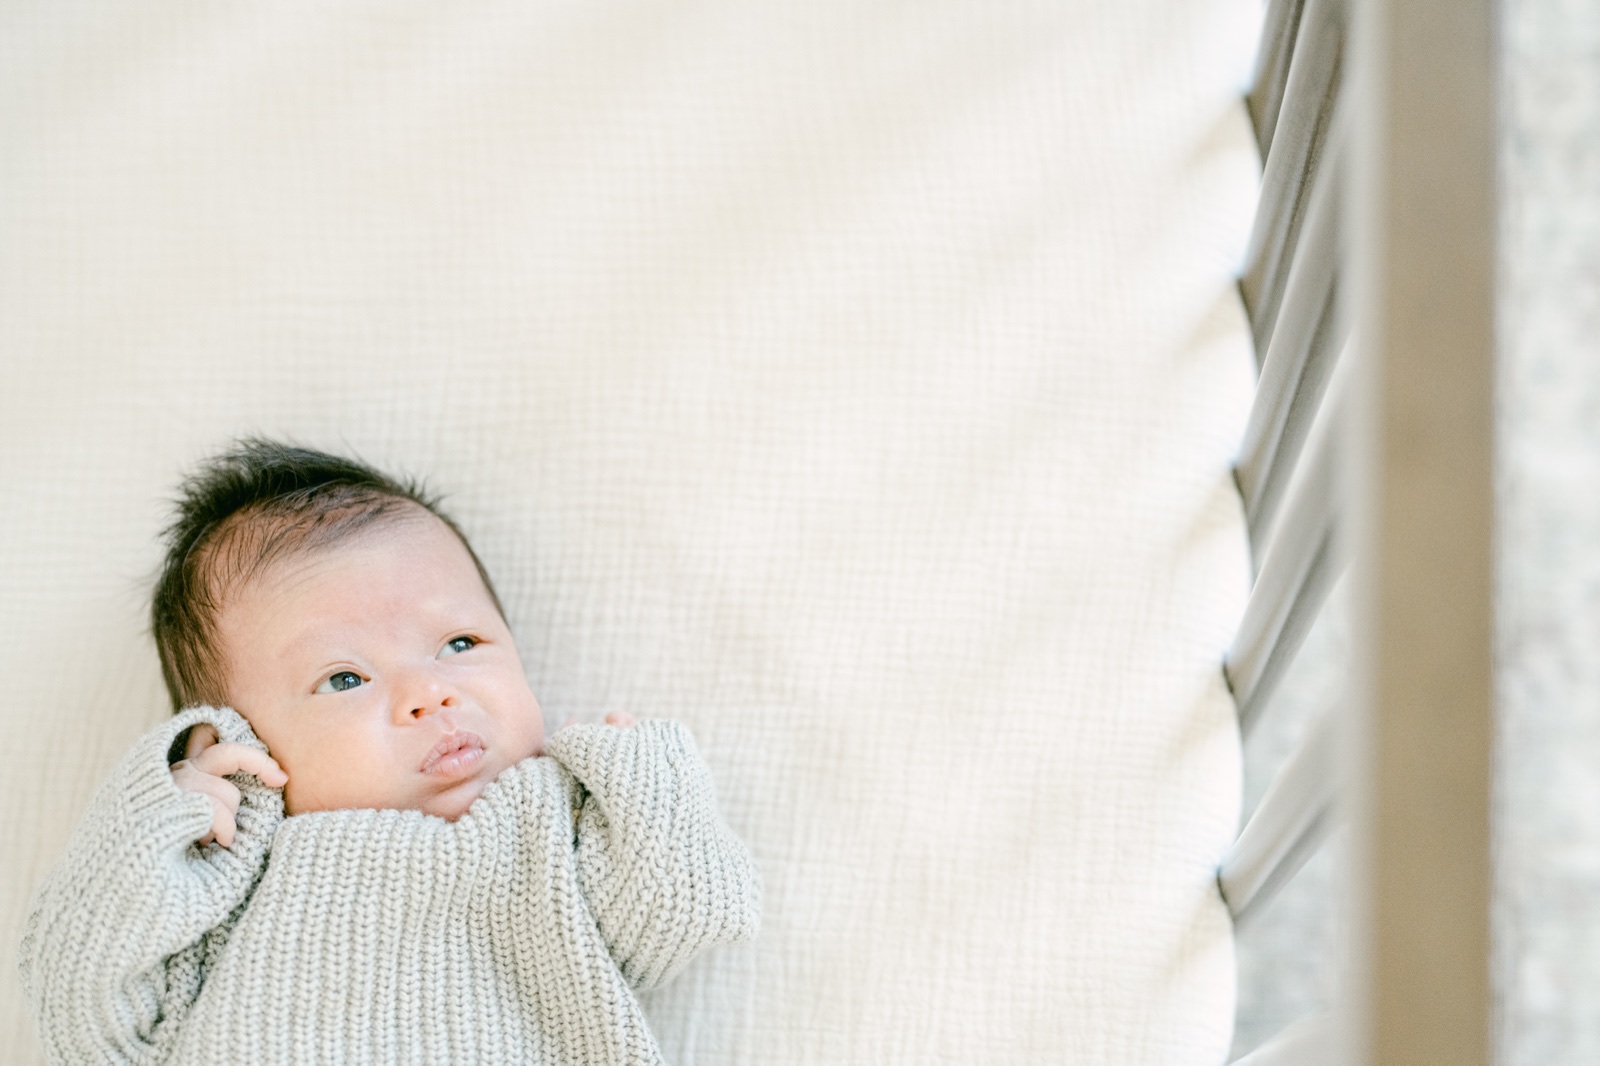 Candid photos of a Denver newborn baby during a photoshoot